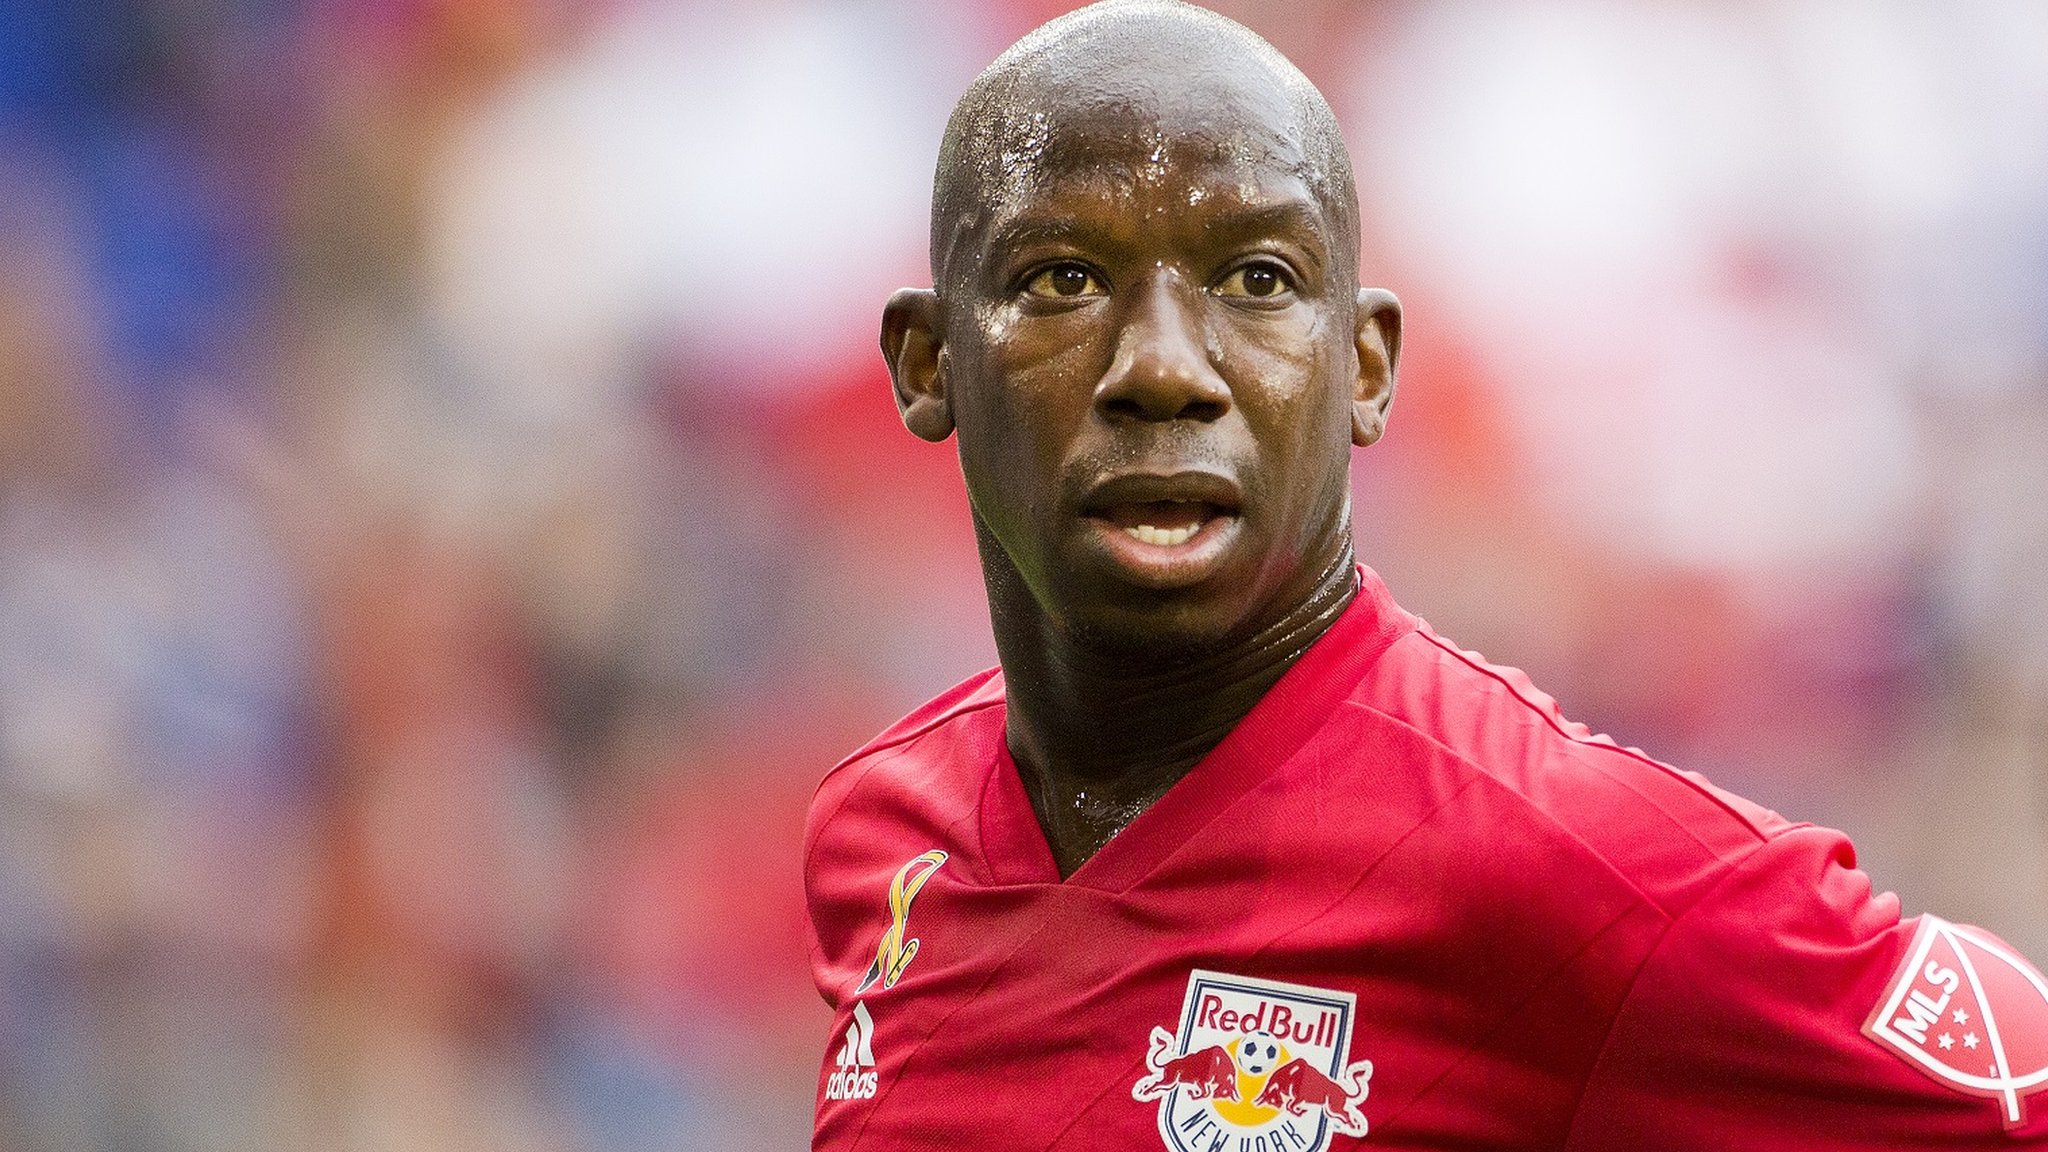 MLS: Bradley Wright-Phillips first player to score 20 or more goals in three seasons